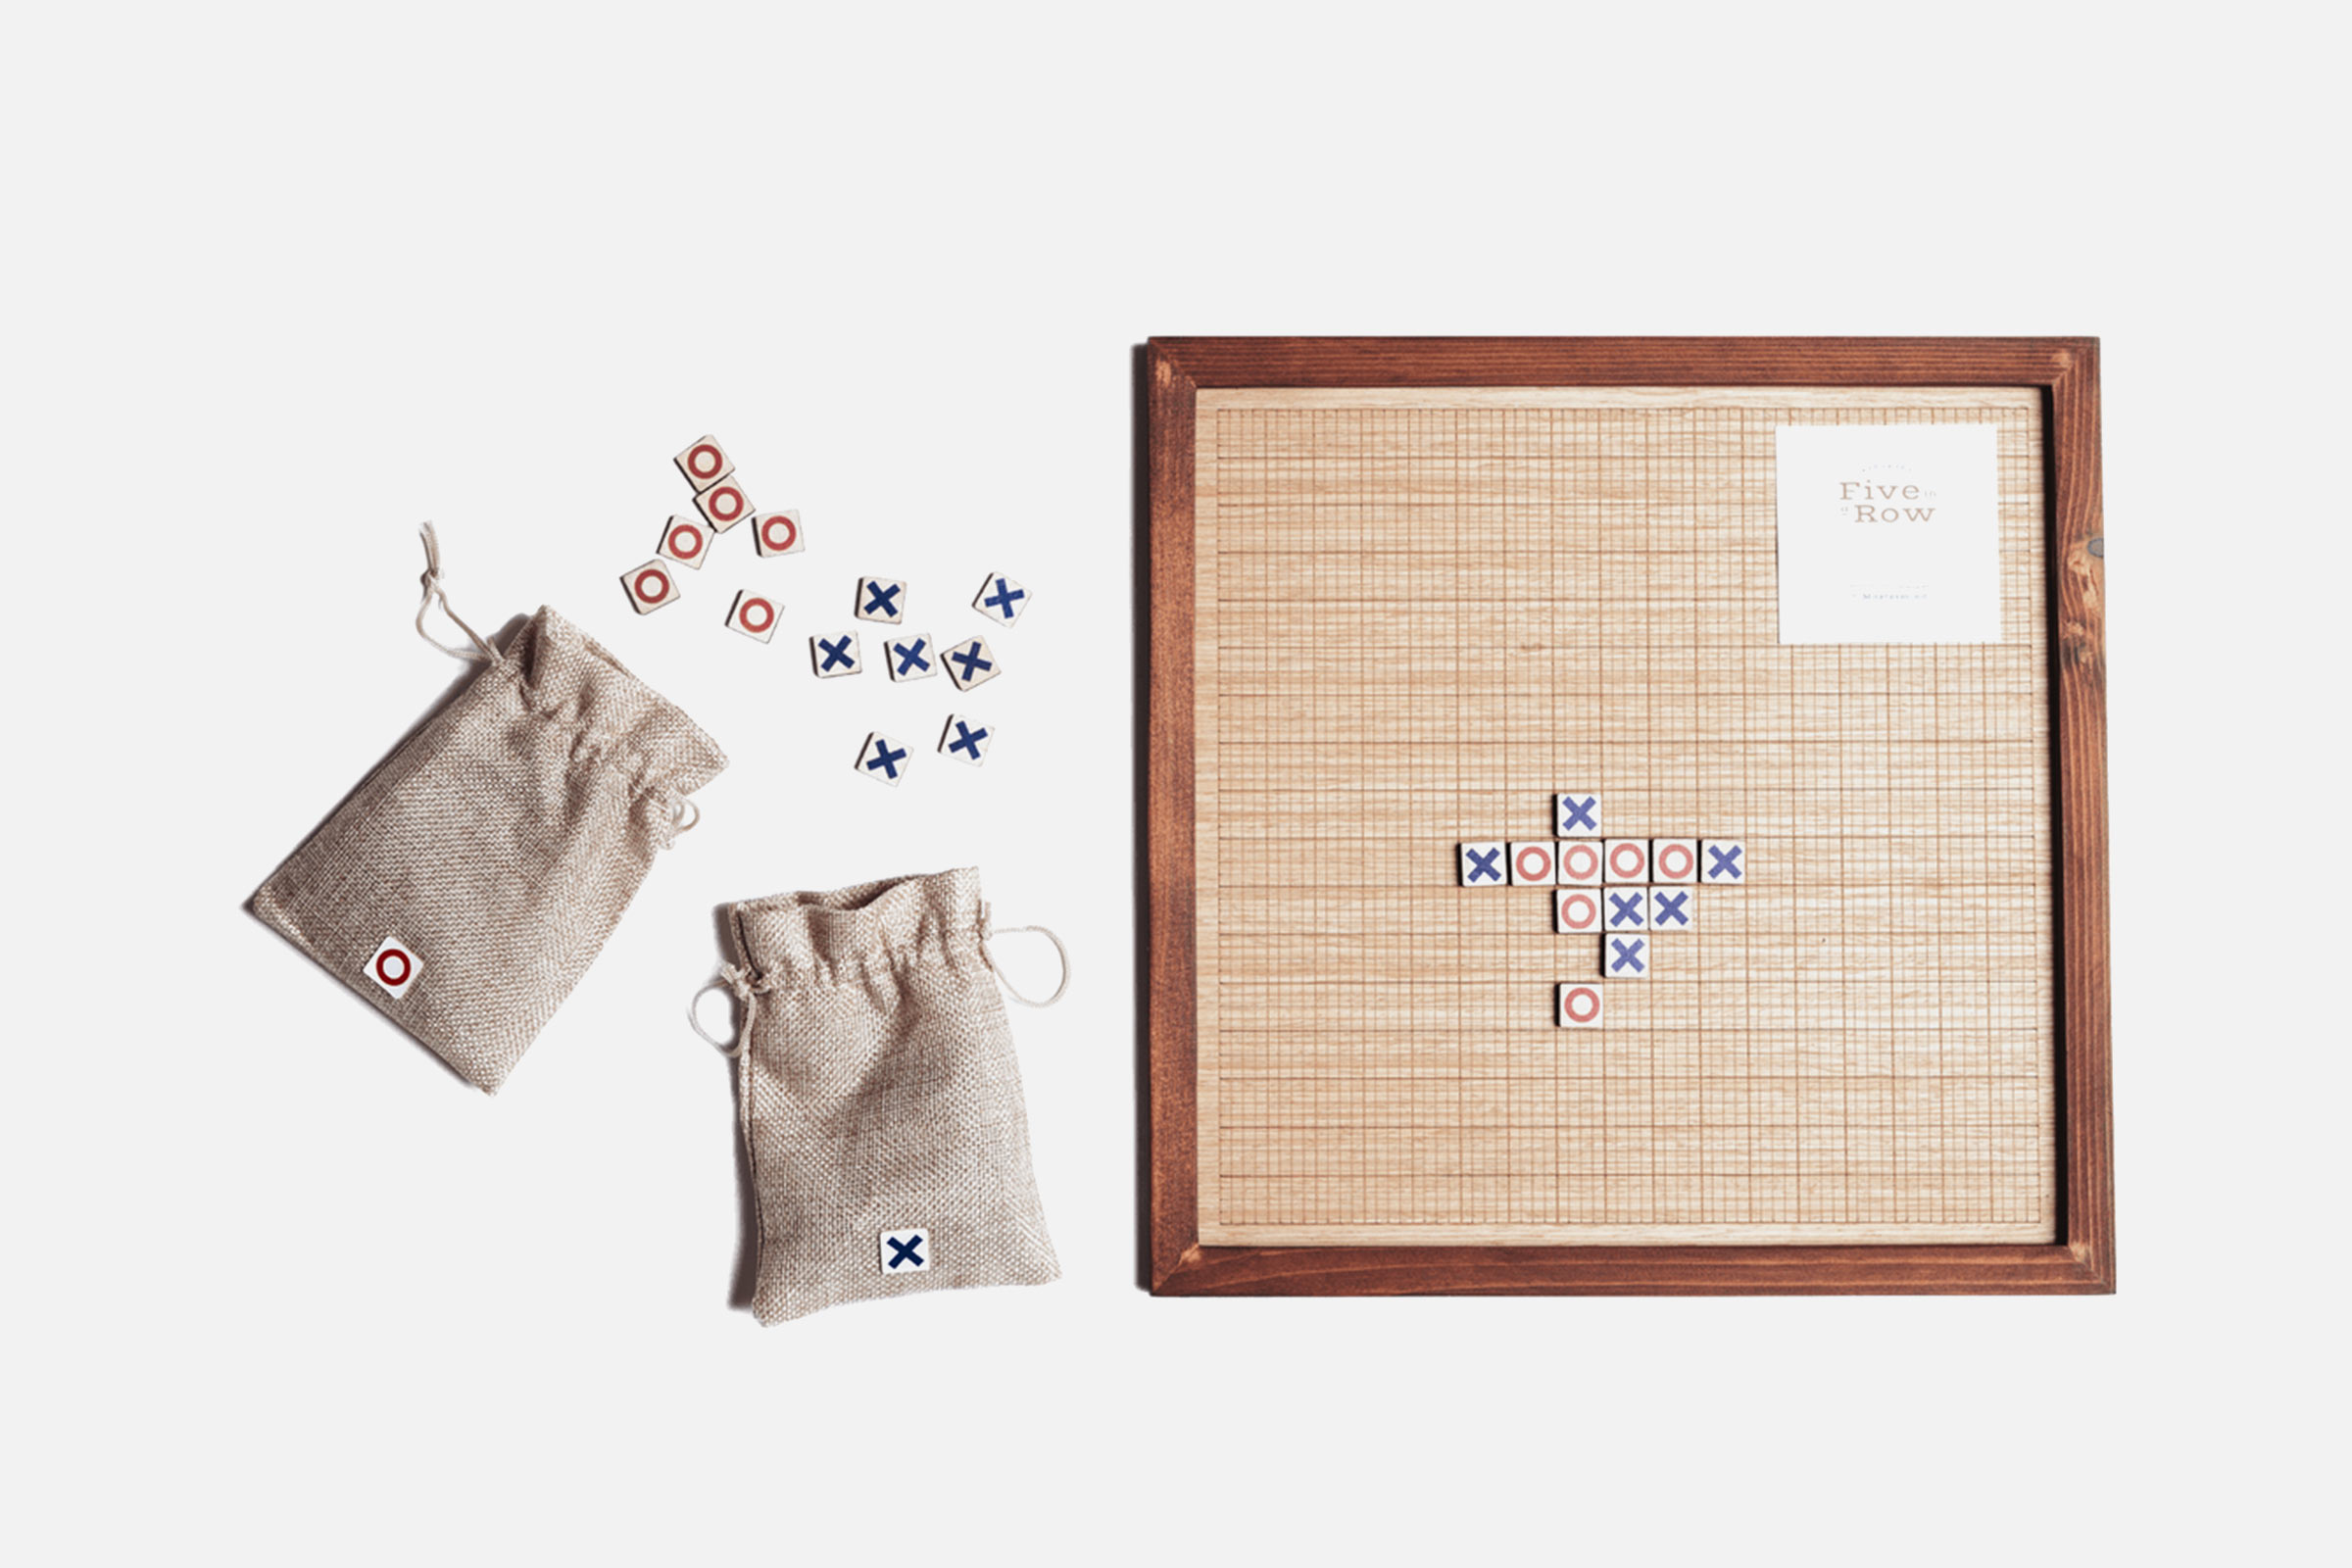 Vintage　in　Row:　Game　The　Five　Board　a　Wooden　Maztermind　Recall